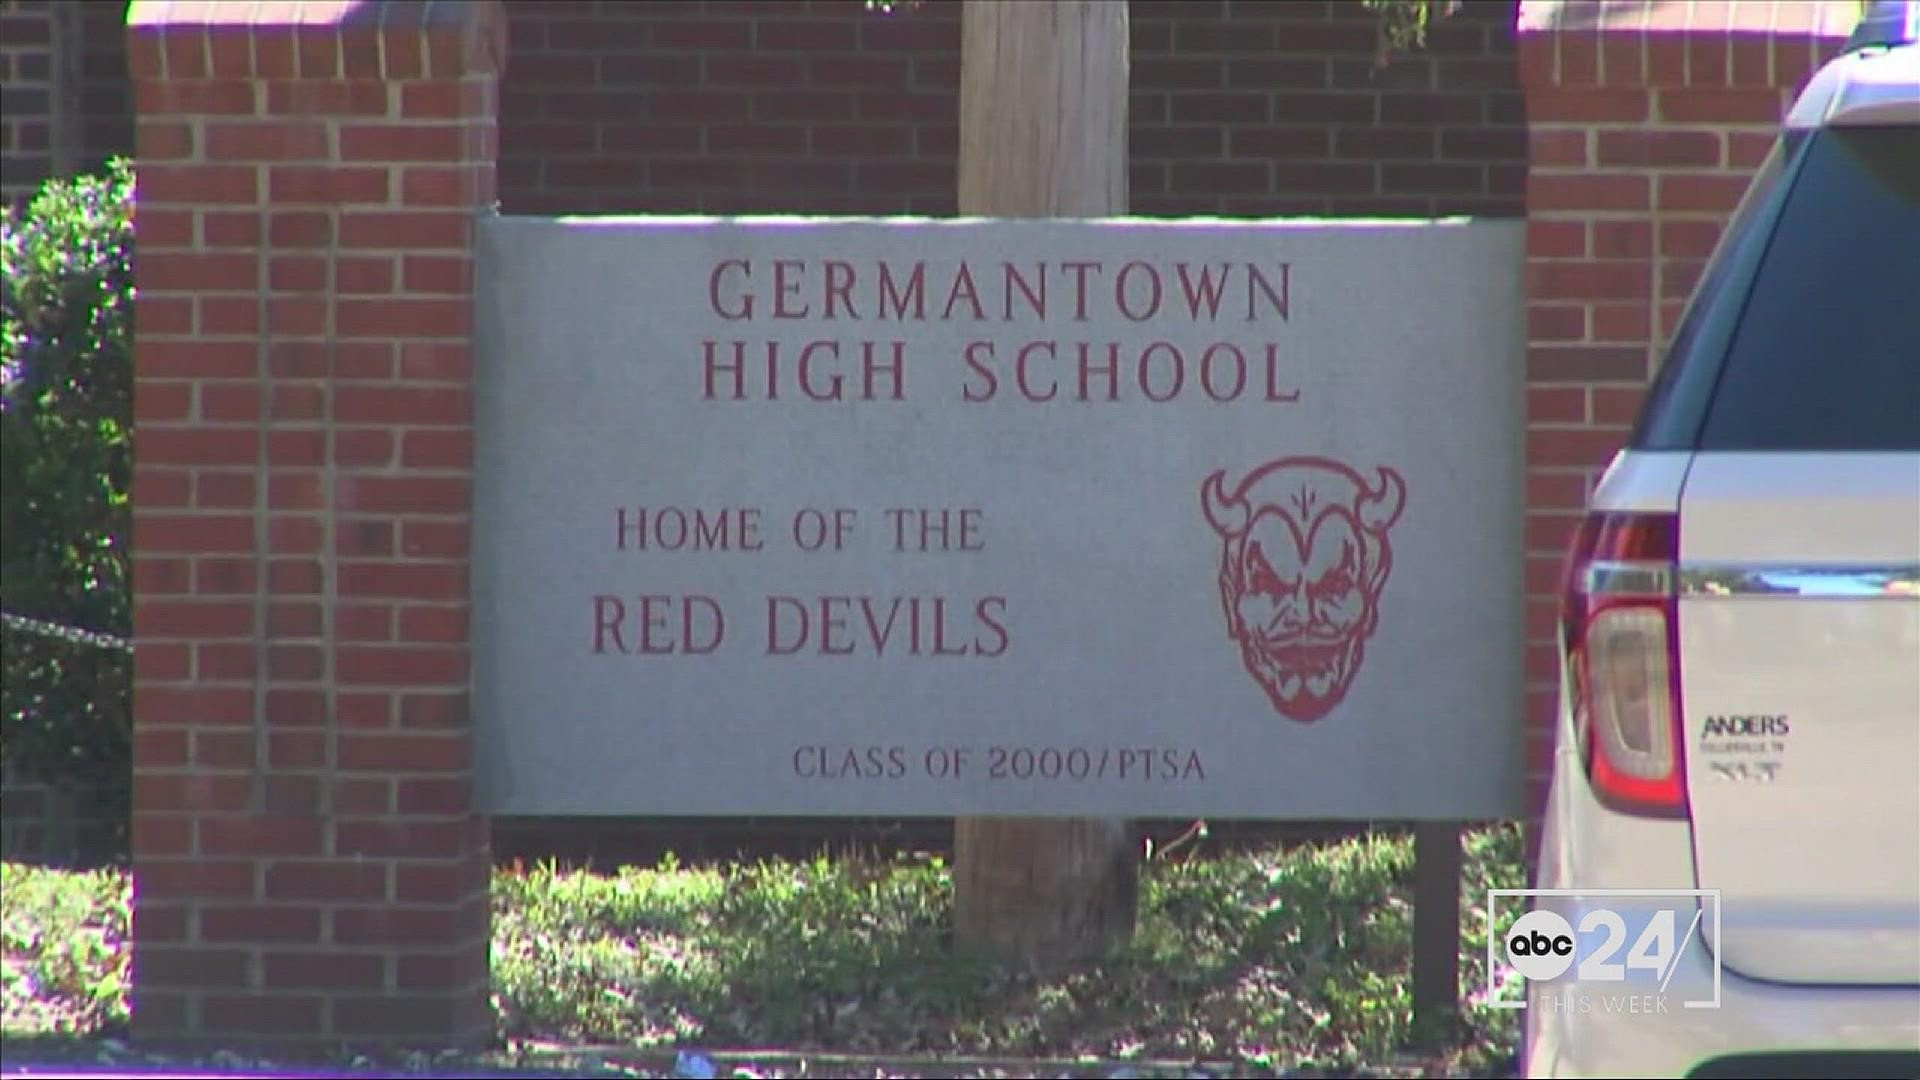 Mayor of Shelby County Lee Harris discusses a proposal that would make Germantown elementary and middle schools become property of the Germantown municipal district.